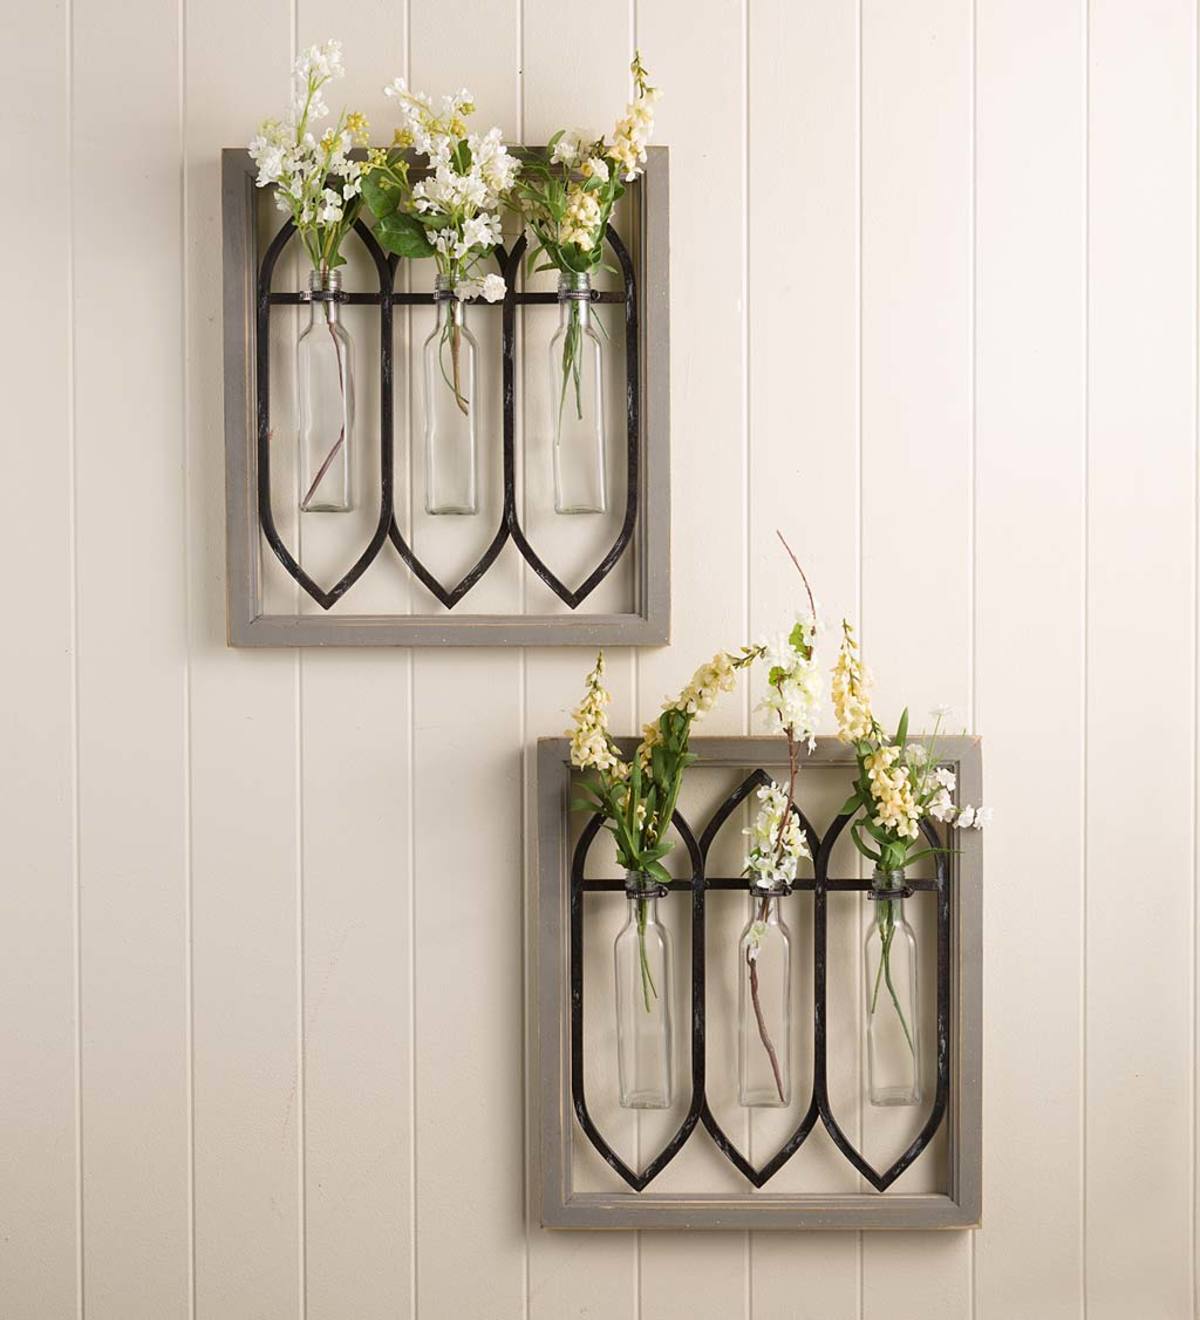 Wooden Window Panel Wall Art with Vases